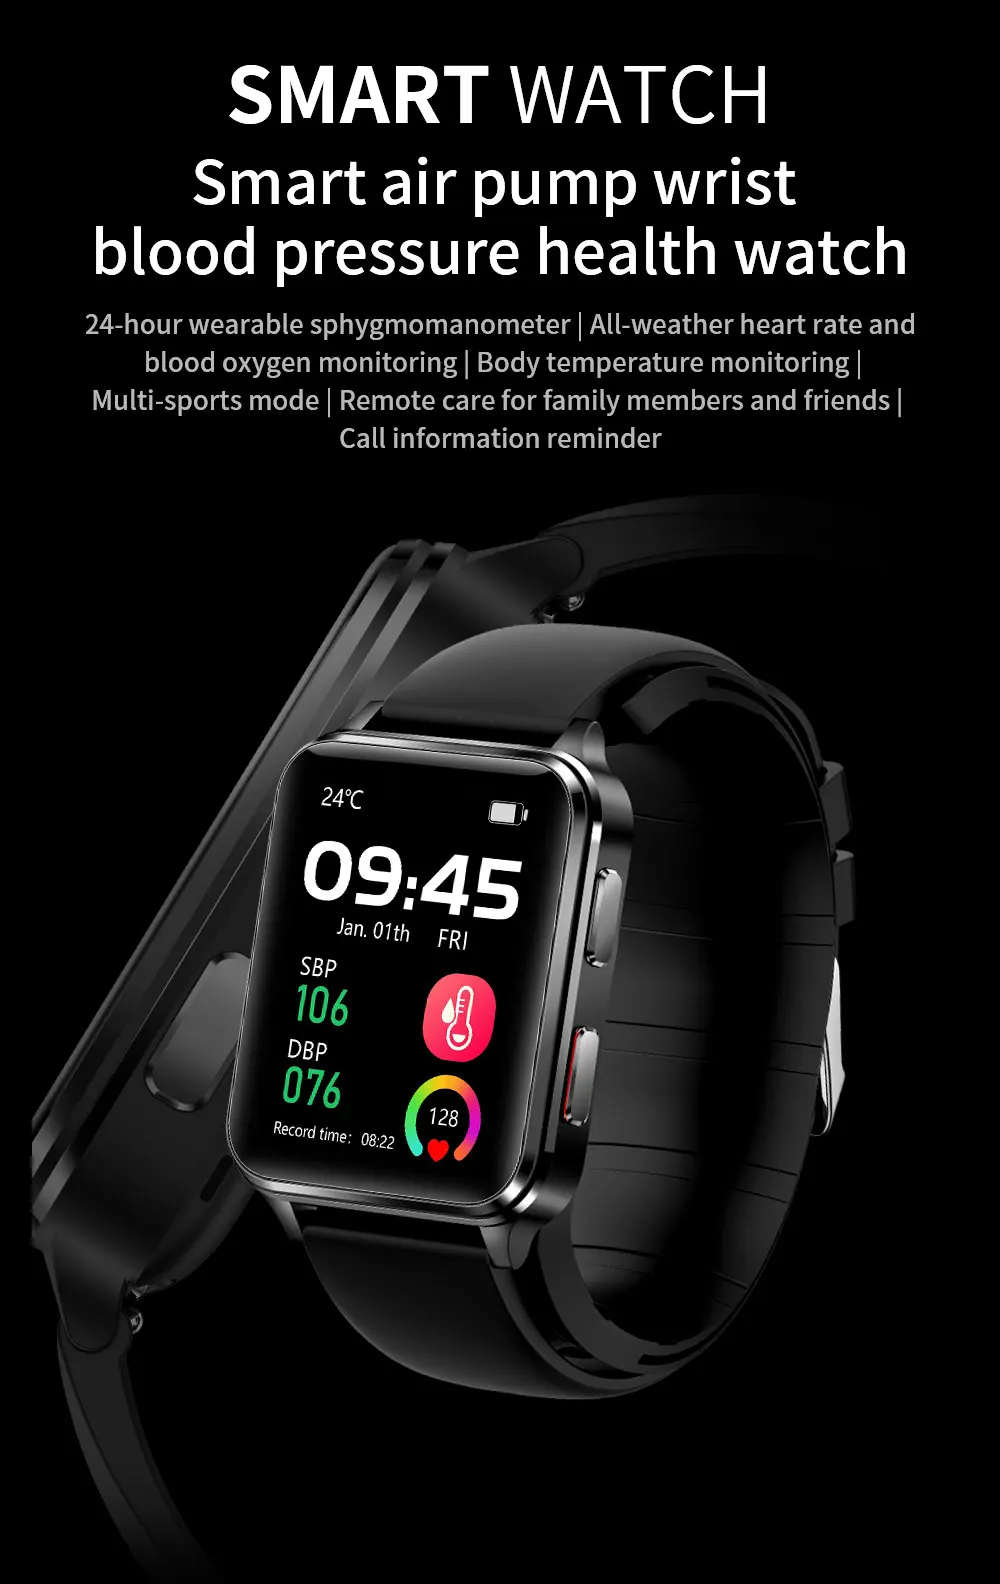 Smart Watch S6 Air Pump Accurate Blood Pressure Test Blood Oxygen Body Temperature Heart Rate Sleep Monitoring Sports Smartwatch